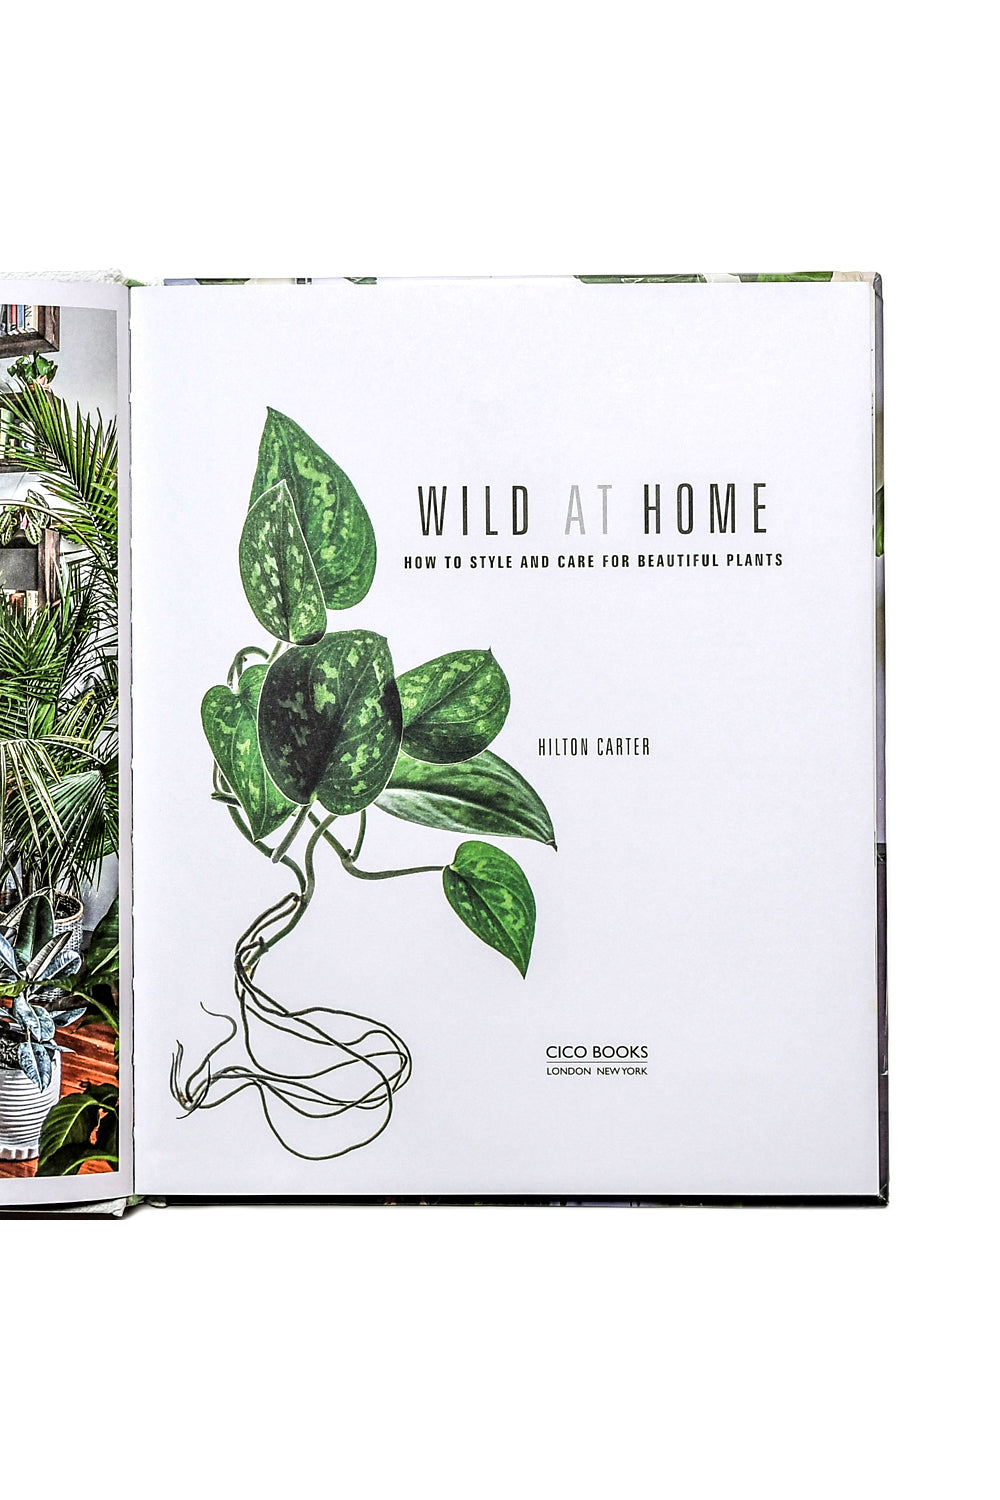 Wild at Home book (SIGNED)